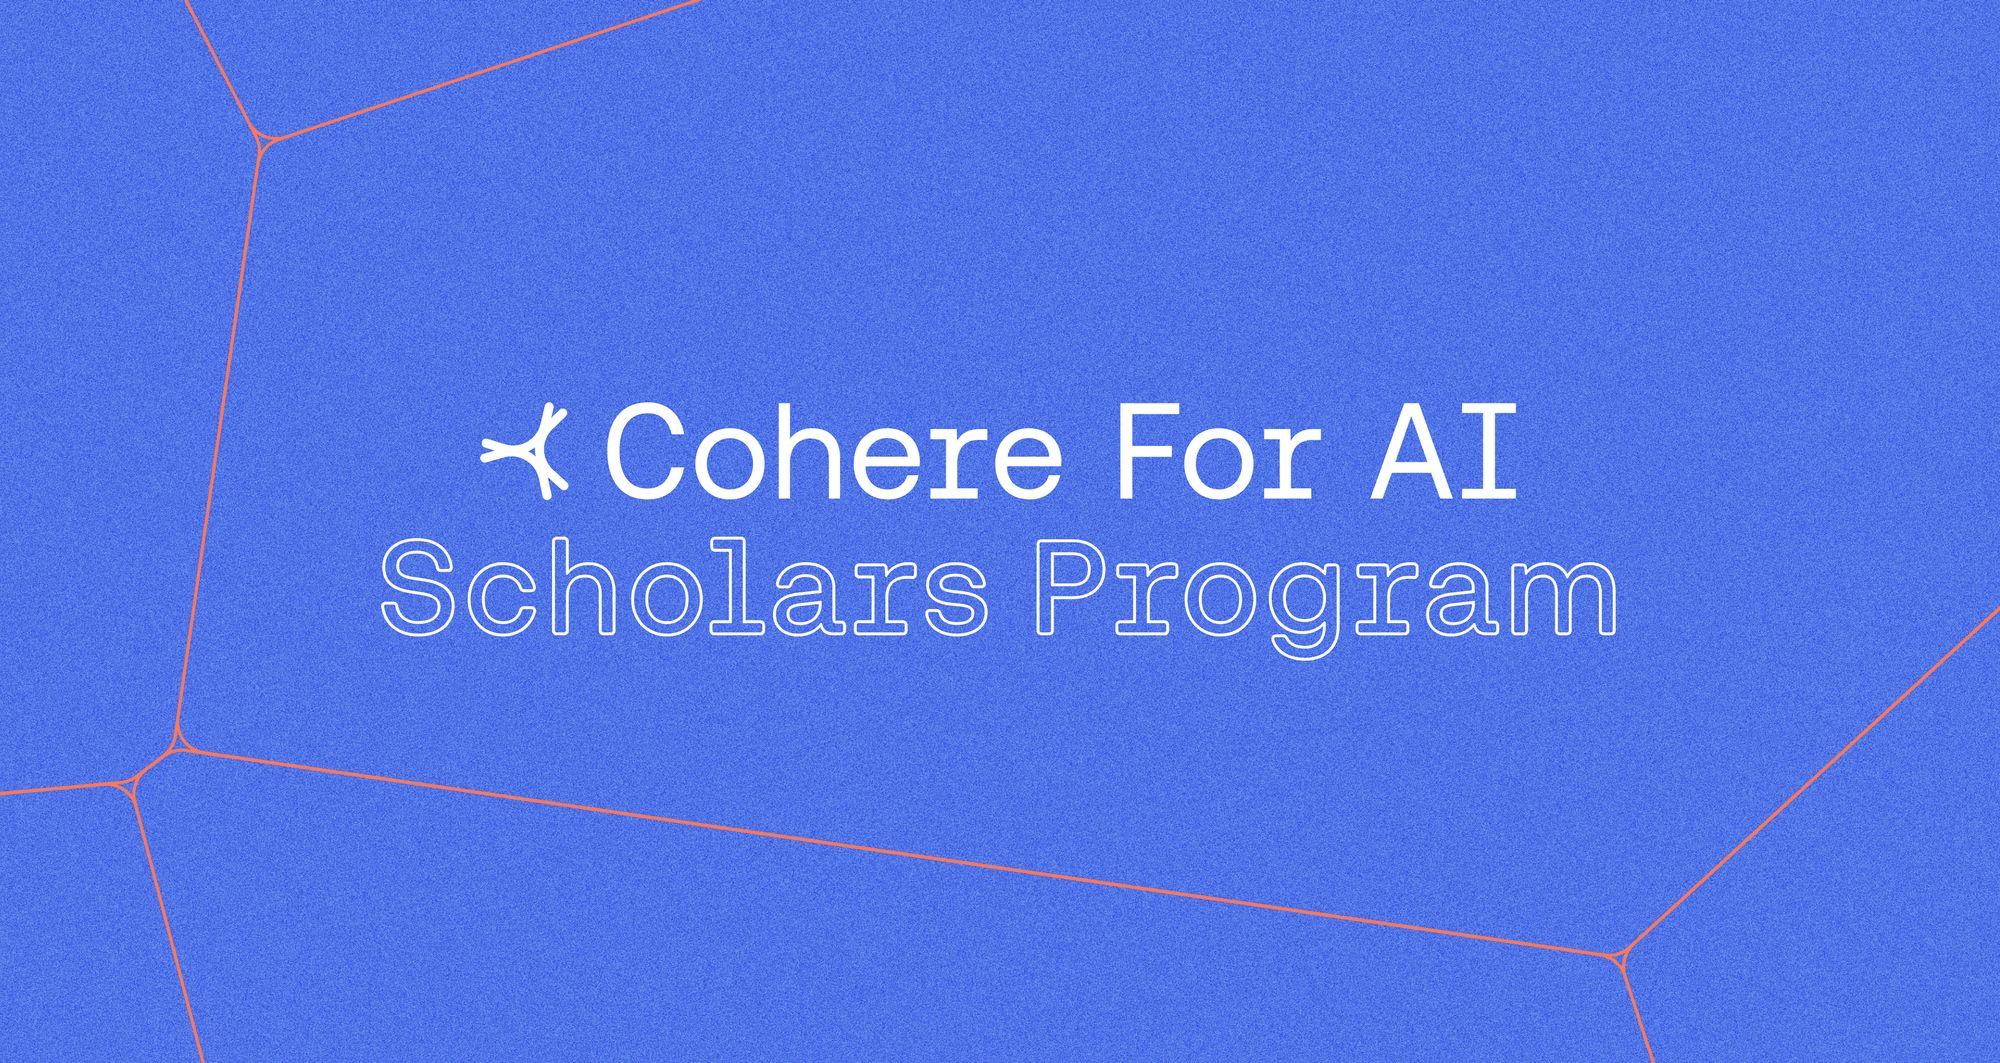 Cohere For AI Scholars Program: Your Research Journey Starts Here